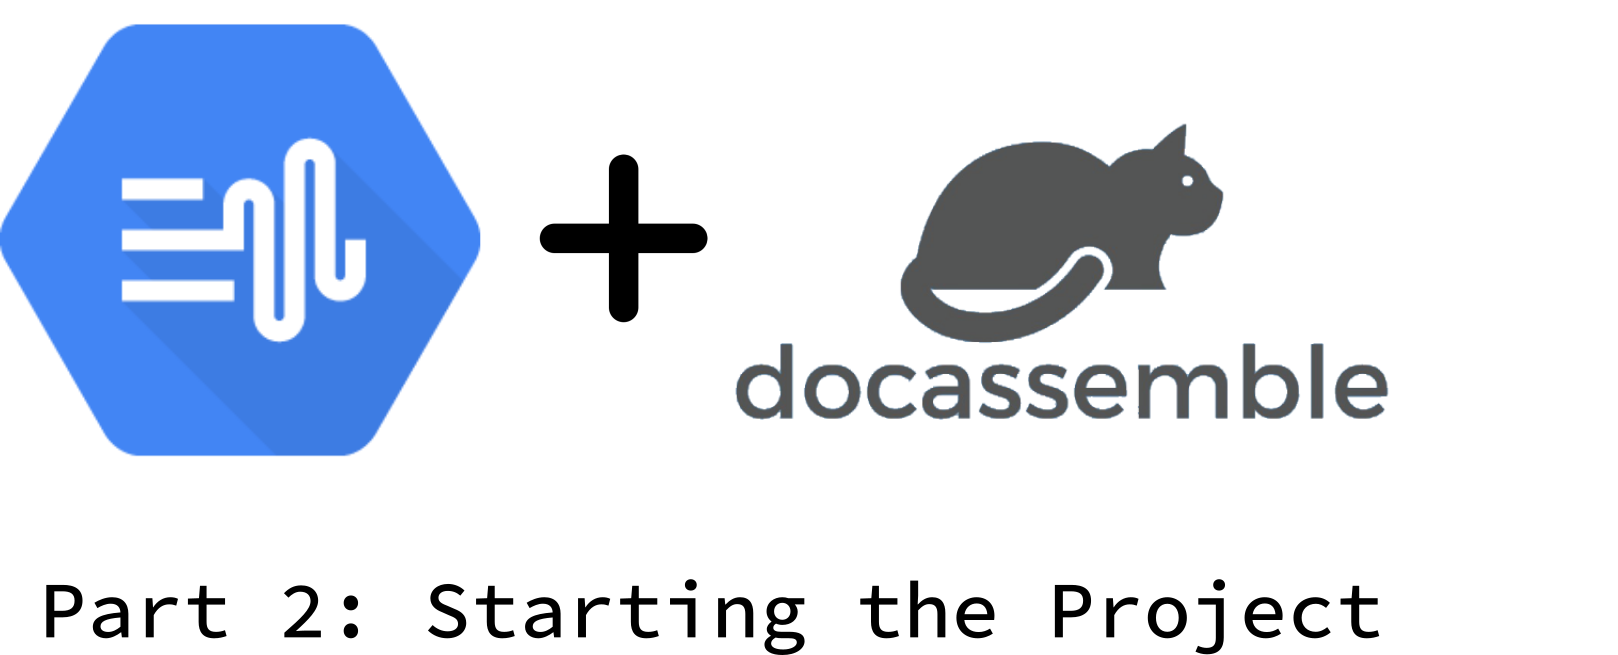 [Part 2] Do more with docassemble: Start a project and write a few questions